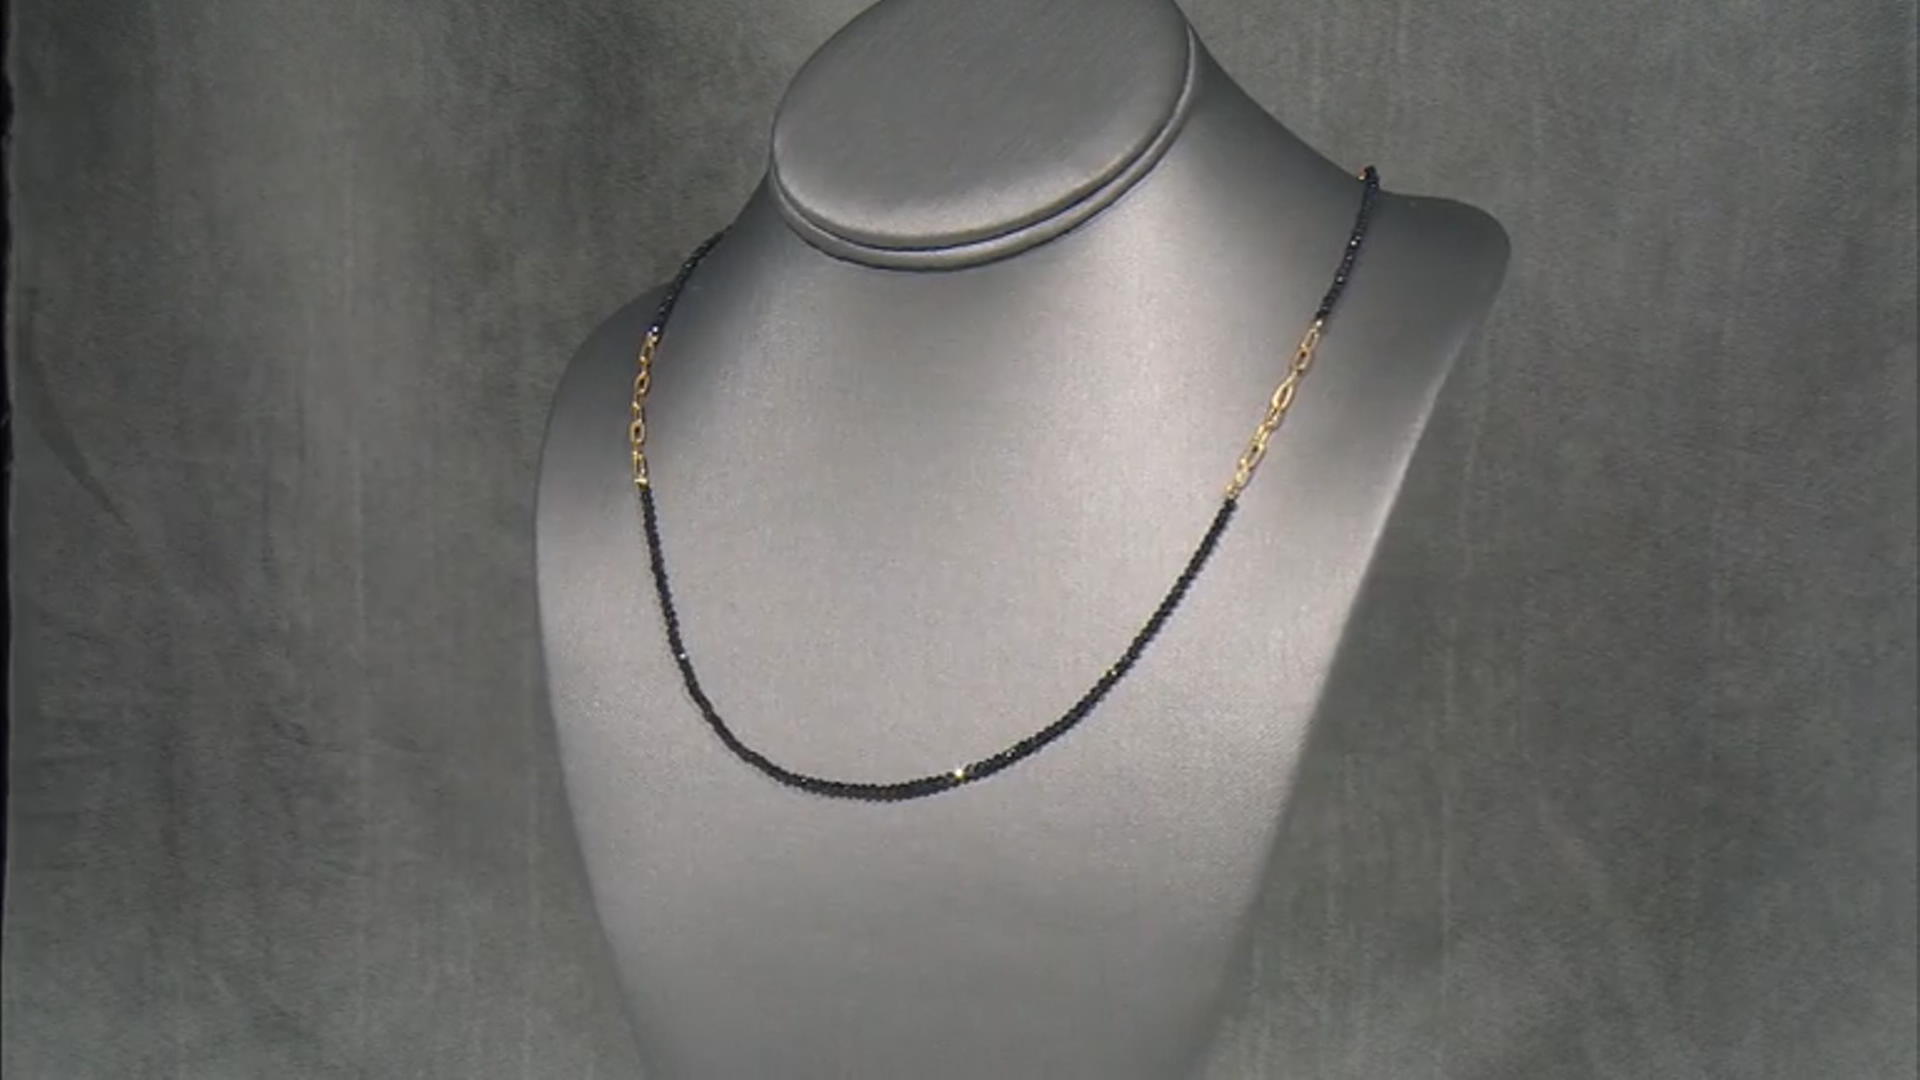 Black Spinel 18k Yellow Gold Over Sterling Silver Necklace Video Thumbnail